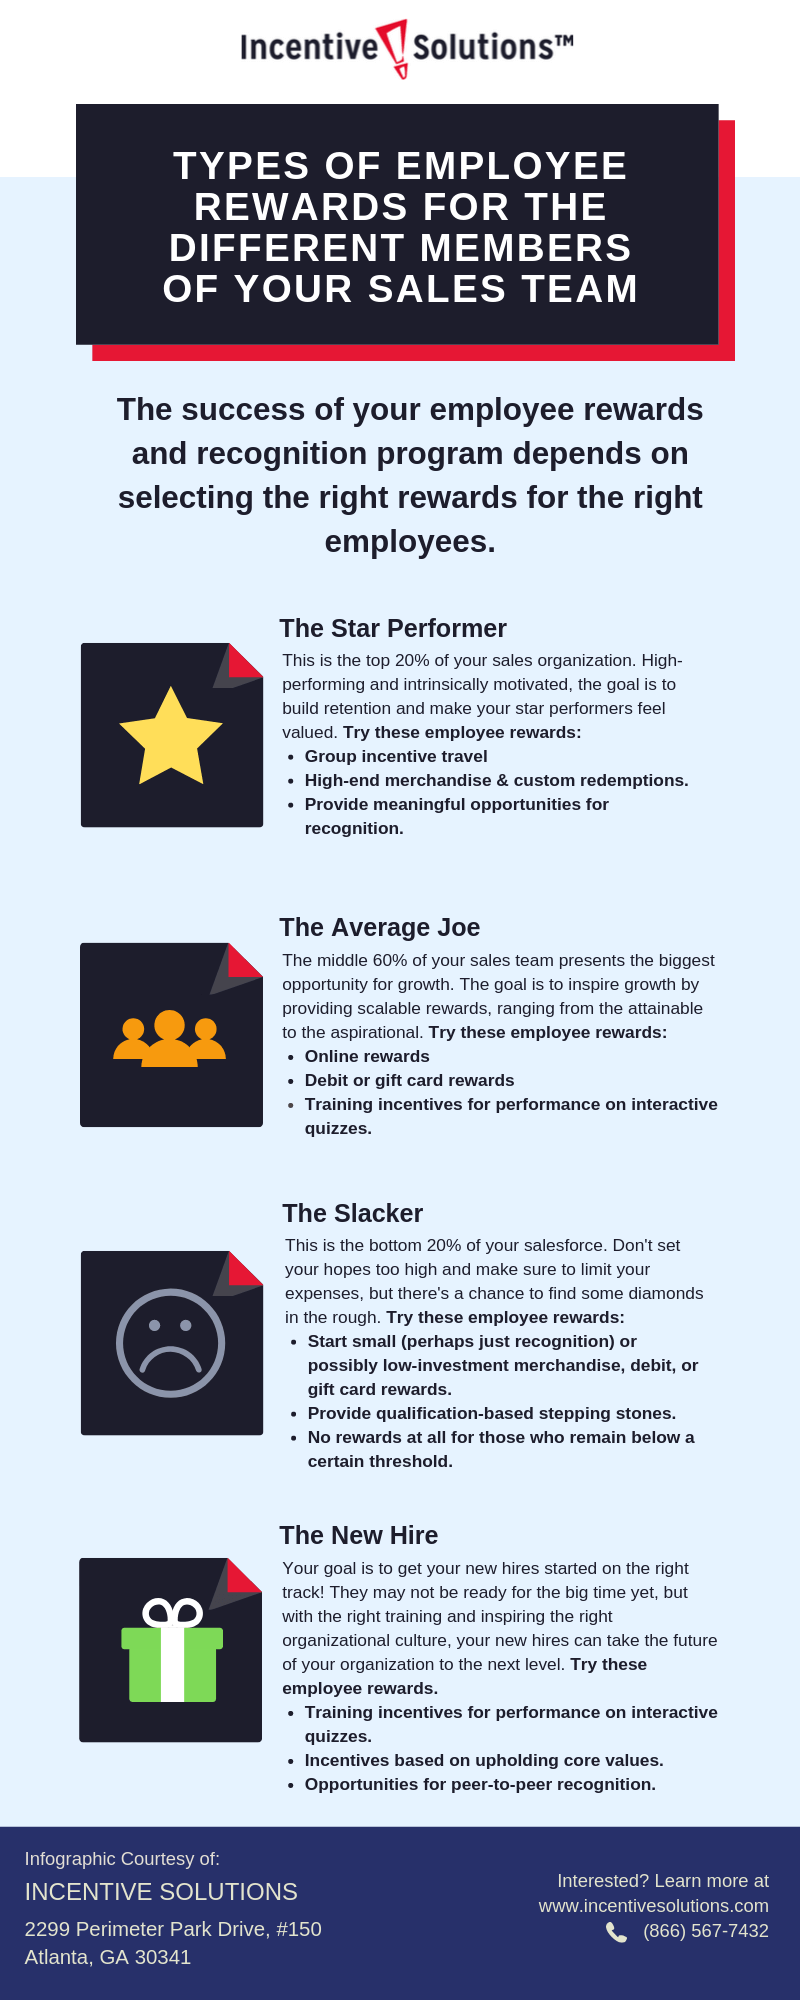 Type of Employee Rewards for Different Members of Your Sales Team